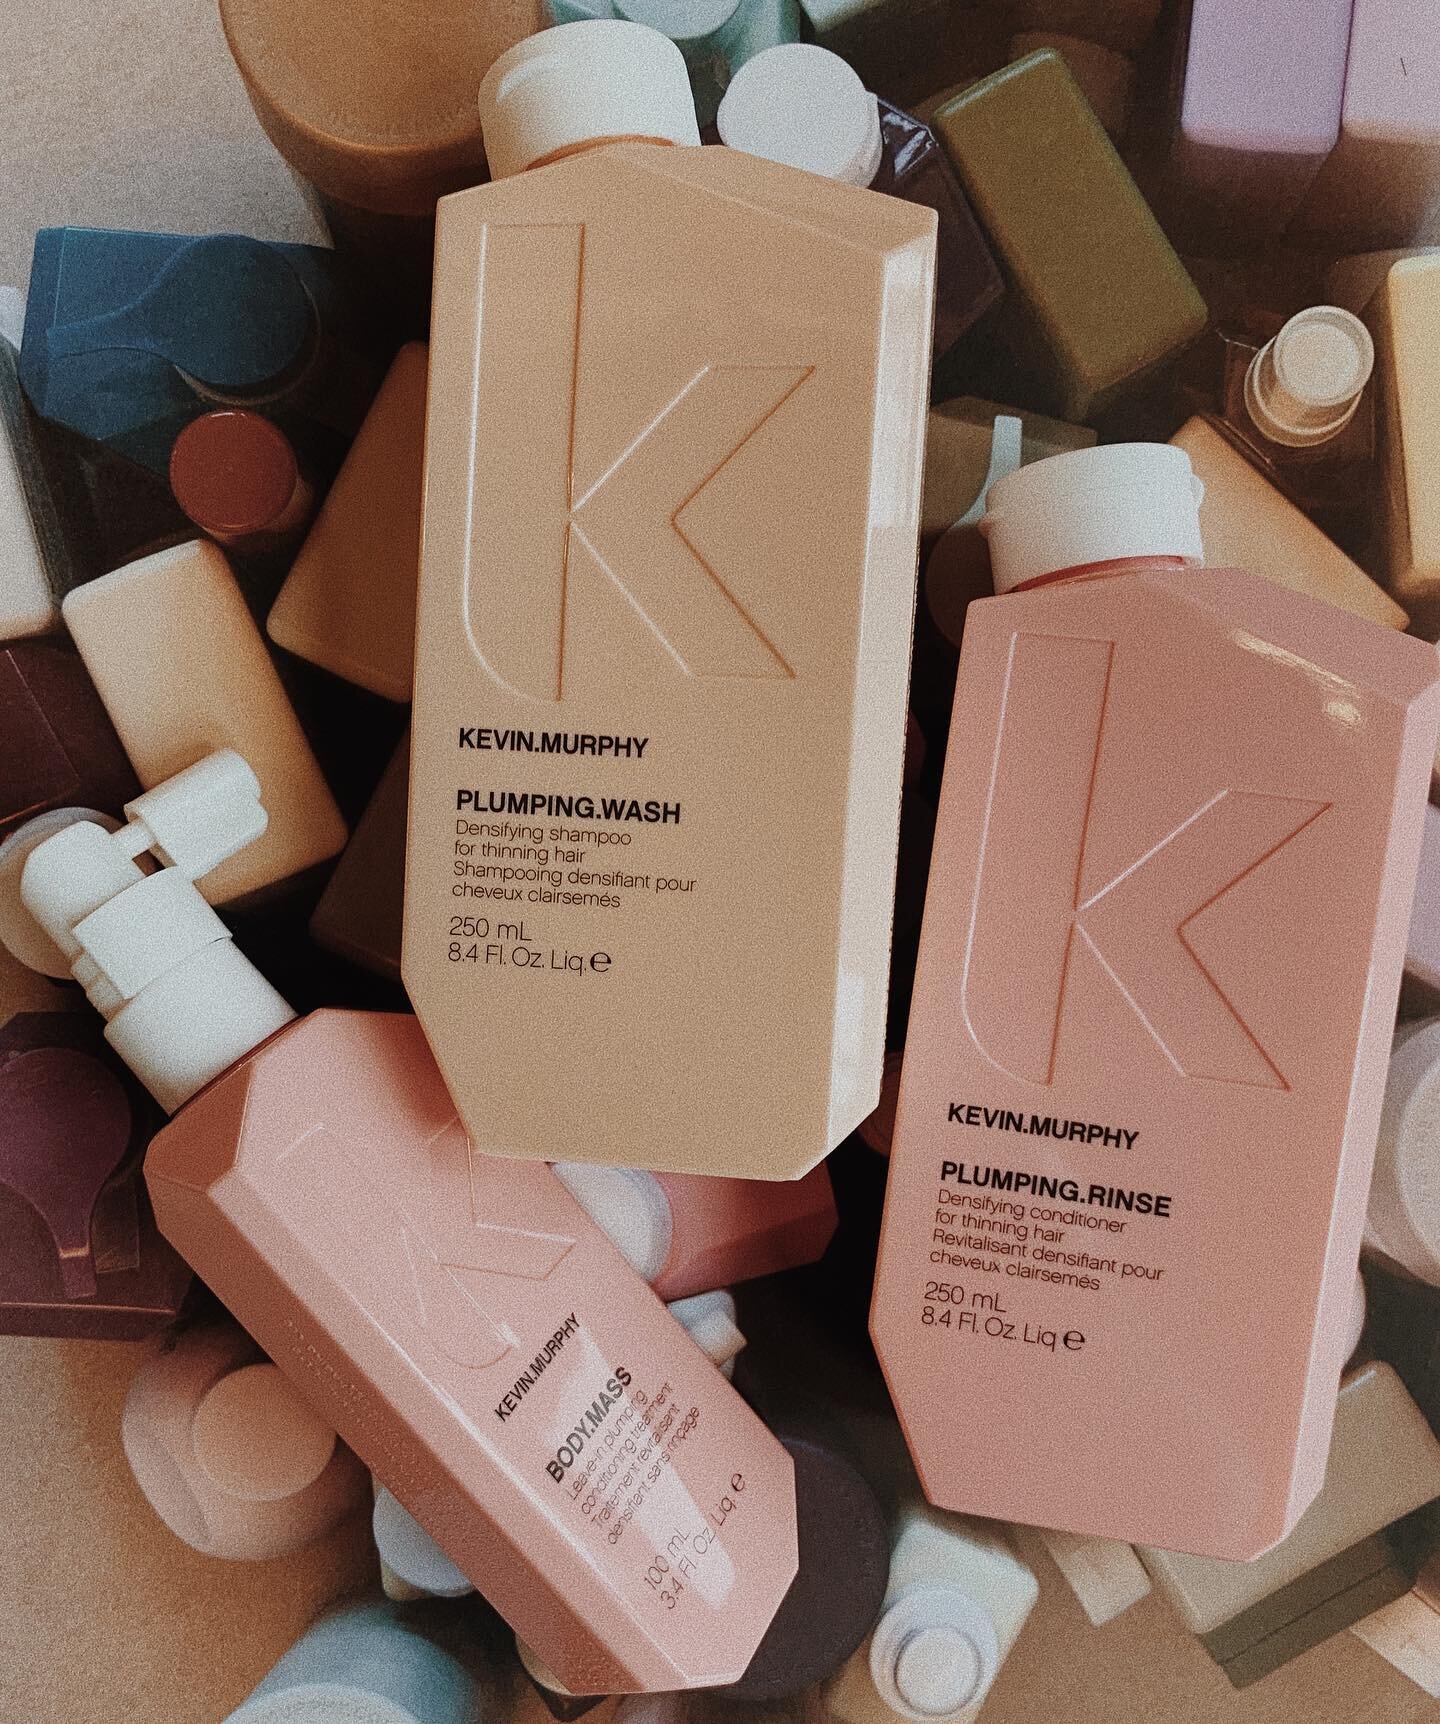 Shop @kevin.murphy in store or online. Holiday sets are available while they last. Shop link in bio 💫 #selflove #haircare #product #shopsmall #smallbusiness #vermontsalon #vermonthair #kevinmurphy